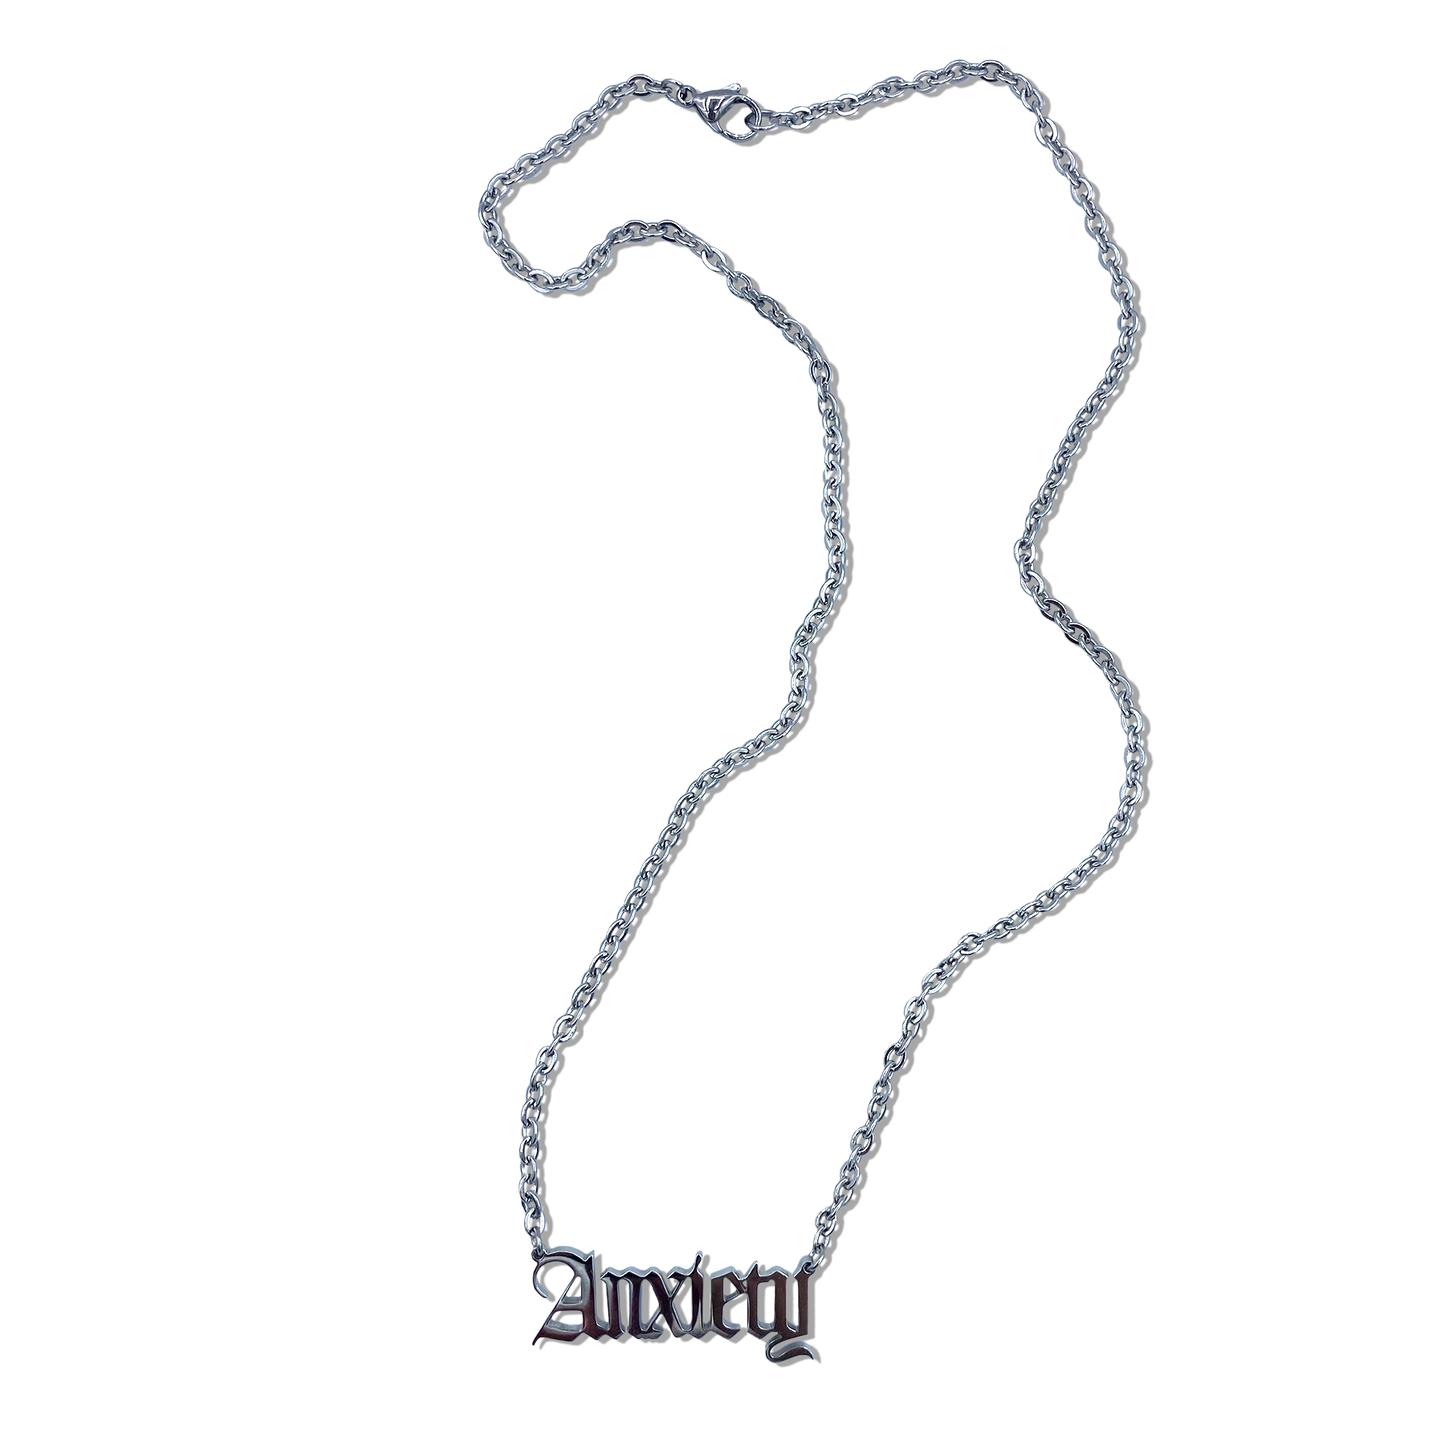 Anxiety Silver Chain Necklace